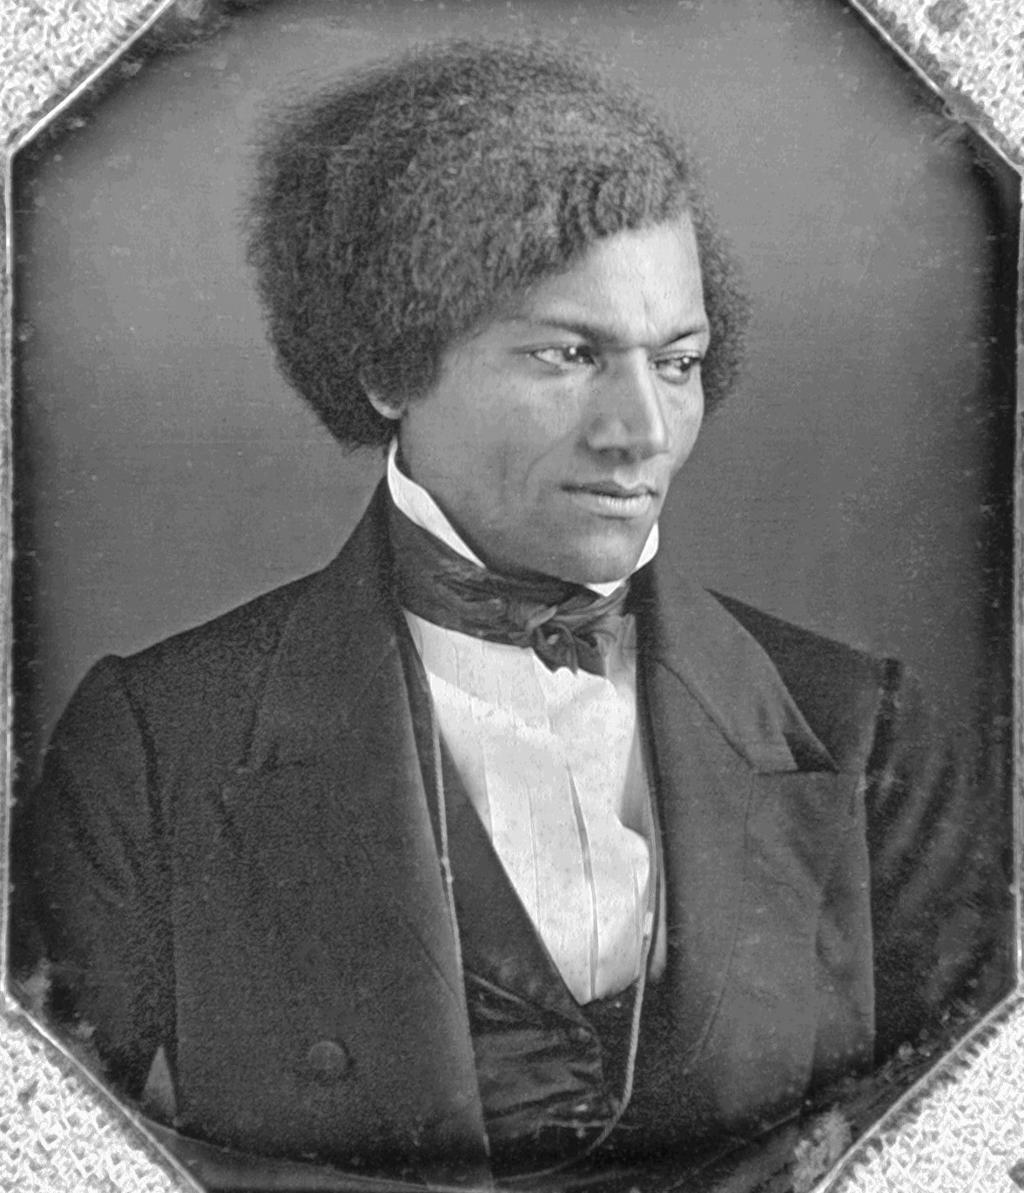 Photo: Black and white portrait of Frederick Douglass. He is wearing a stylish black suit, vest, and tie, a white shirt. He has wavy. black hair. He looks to the right. 